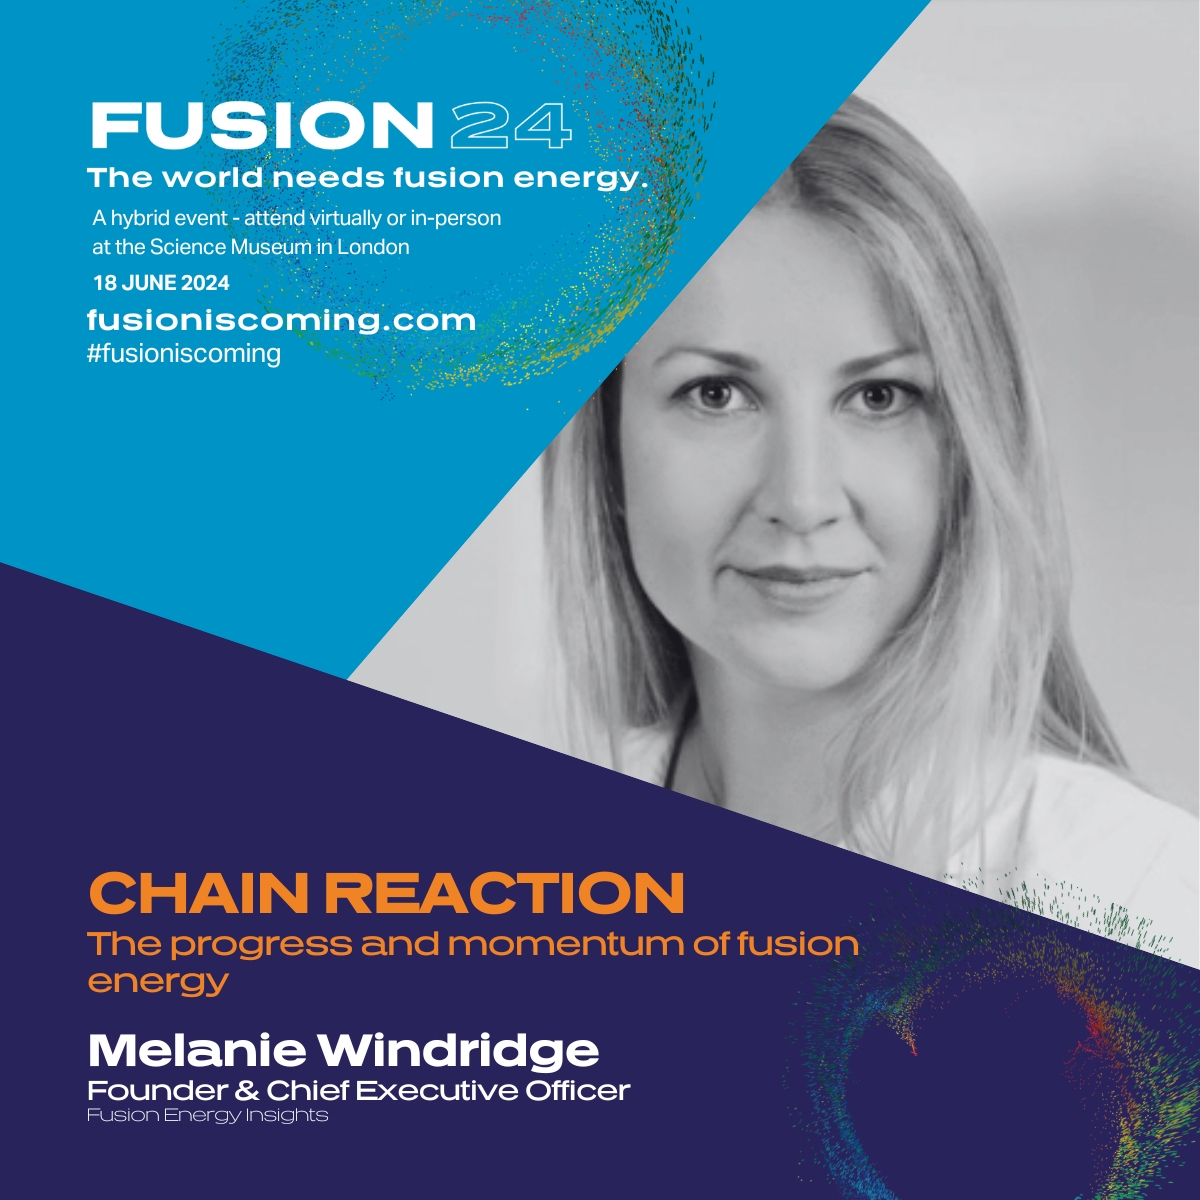 As part of CHAIN REACTION: The progress and momentum of fusion energy ➡Dr @m_windridge from @Fusion_Insights With the help of organisations from across the globe, Melanie will be taking us on a tour of the most recent groundbreaking fusion developments fusioniscoming.com/speakers